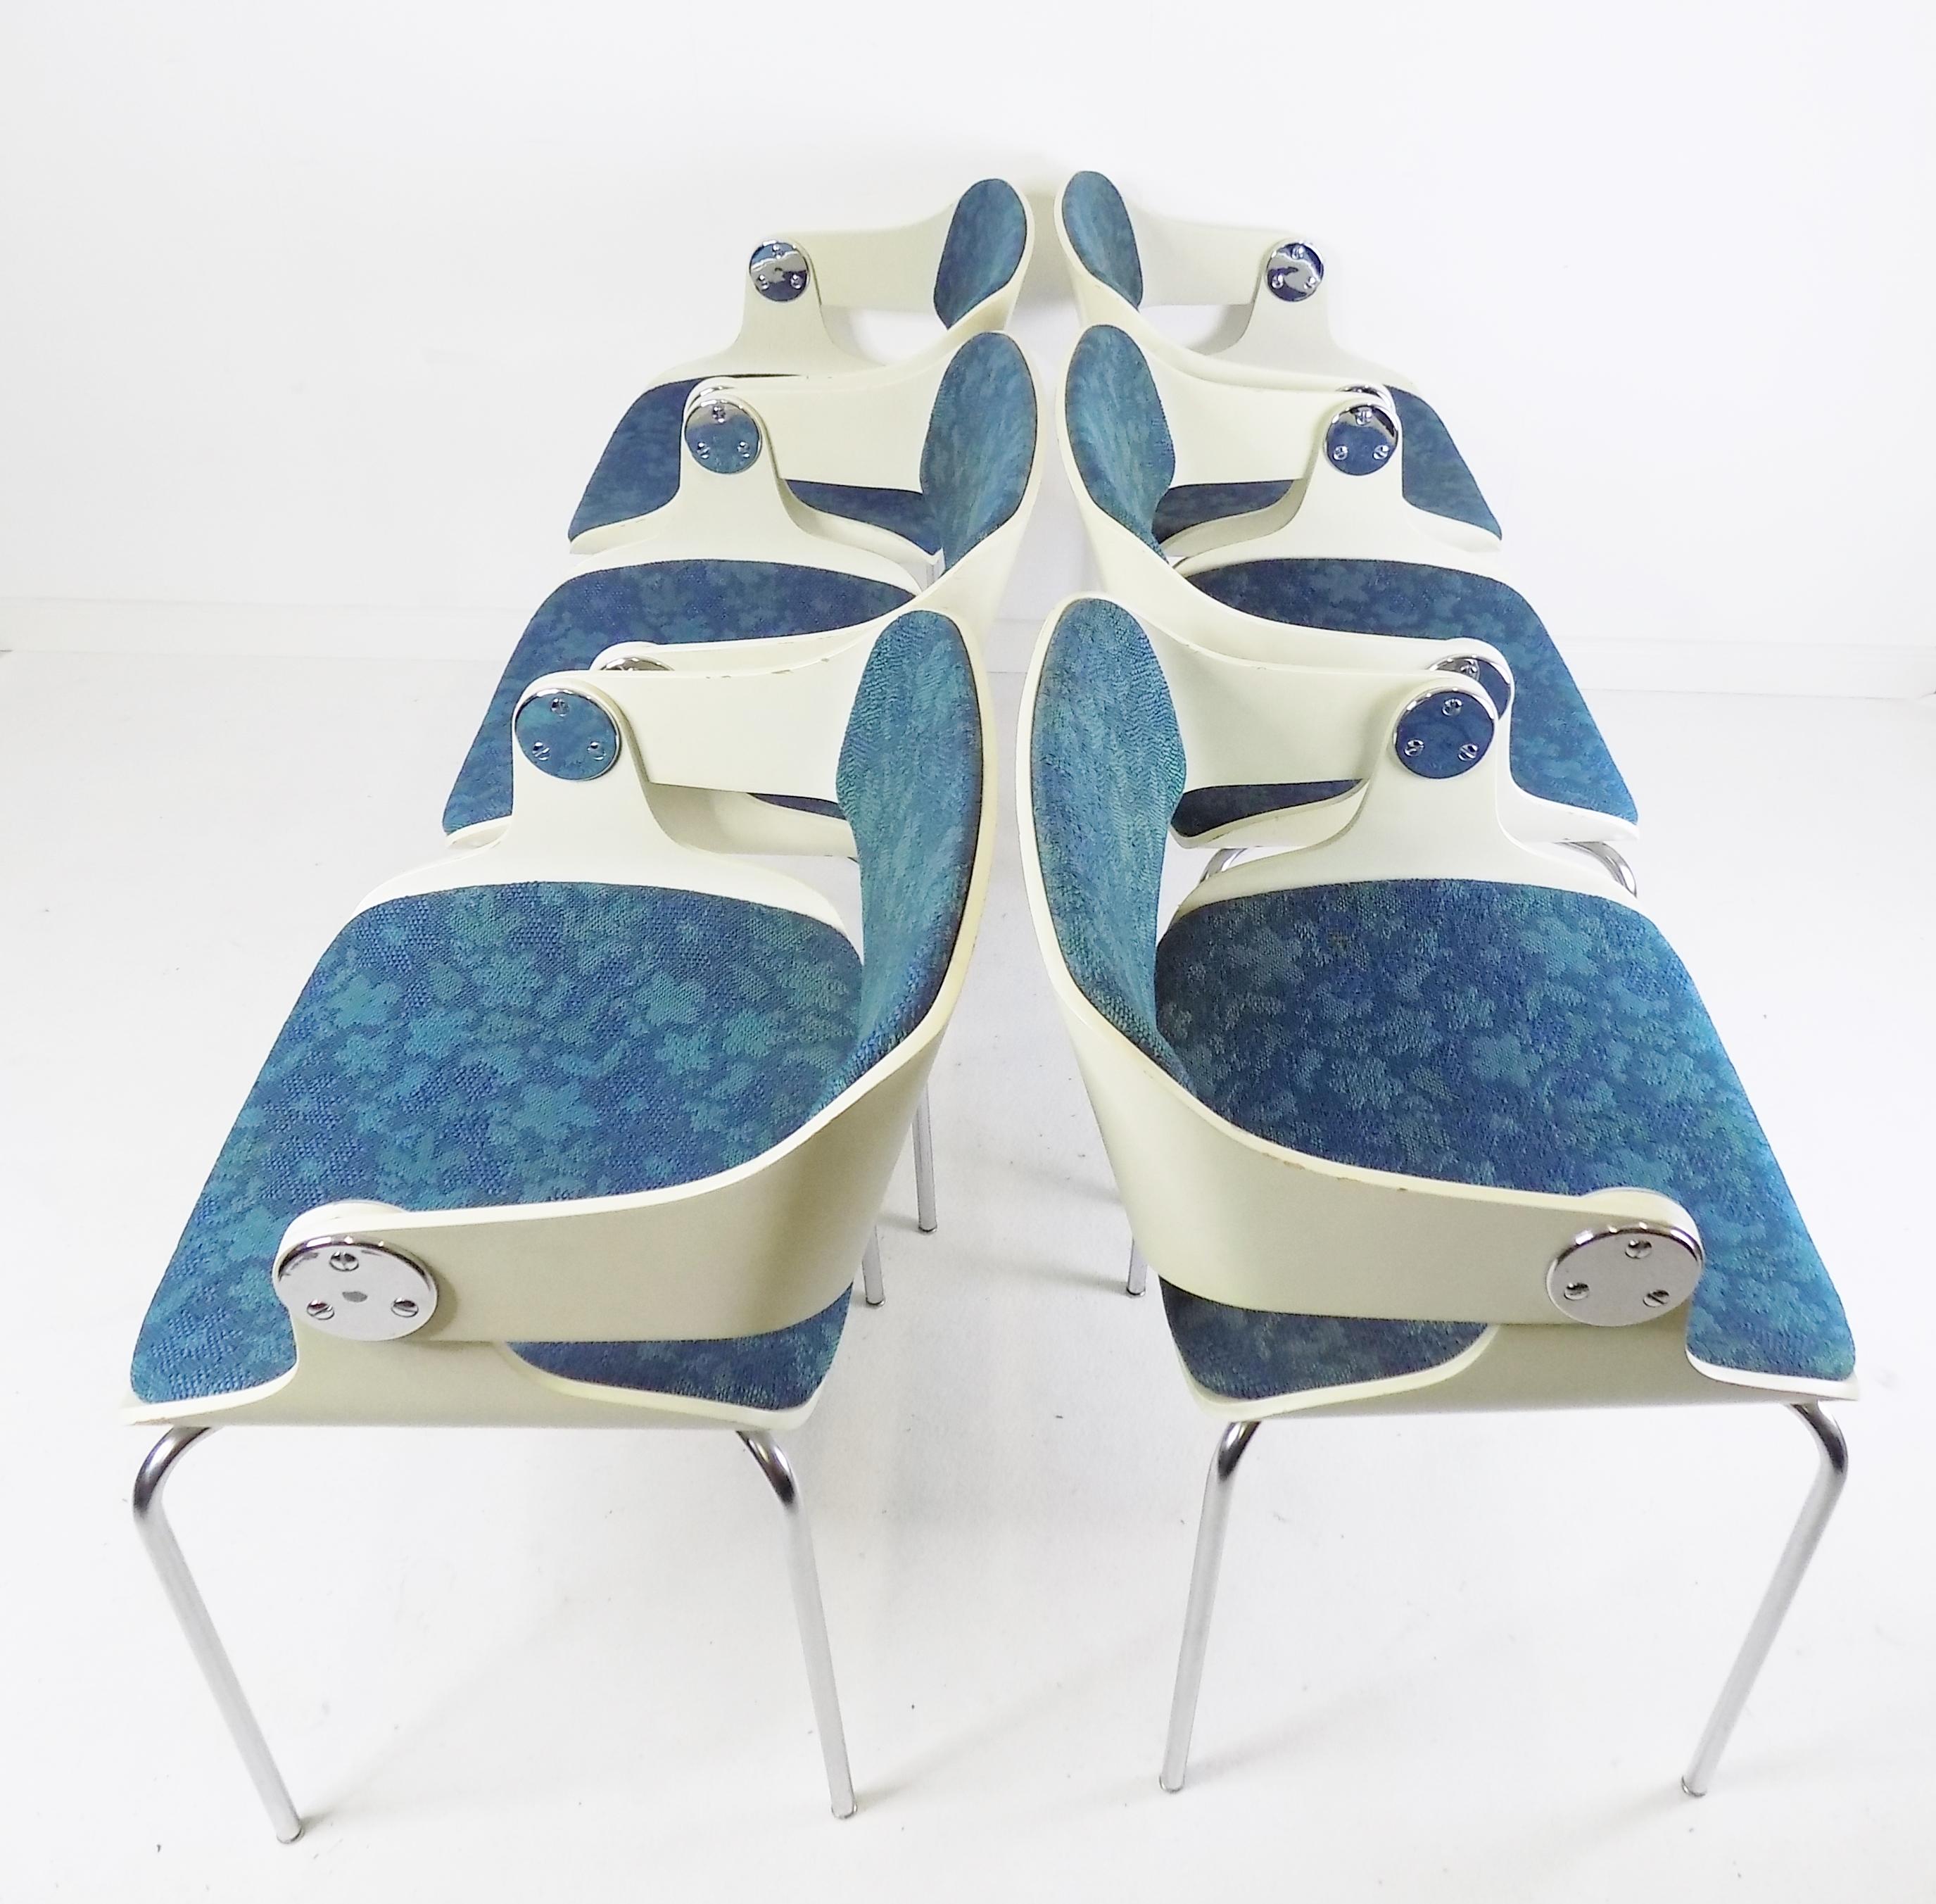 The set of 6 Eugen Schmidt chairs, in a fantastic color combination of white Wooden bowls with aquamarine blue seat pads are in very good condition. There are slight signs of wear on the wooden shells and give the chairs an attractive patina. The